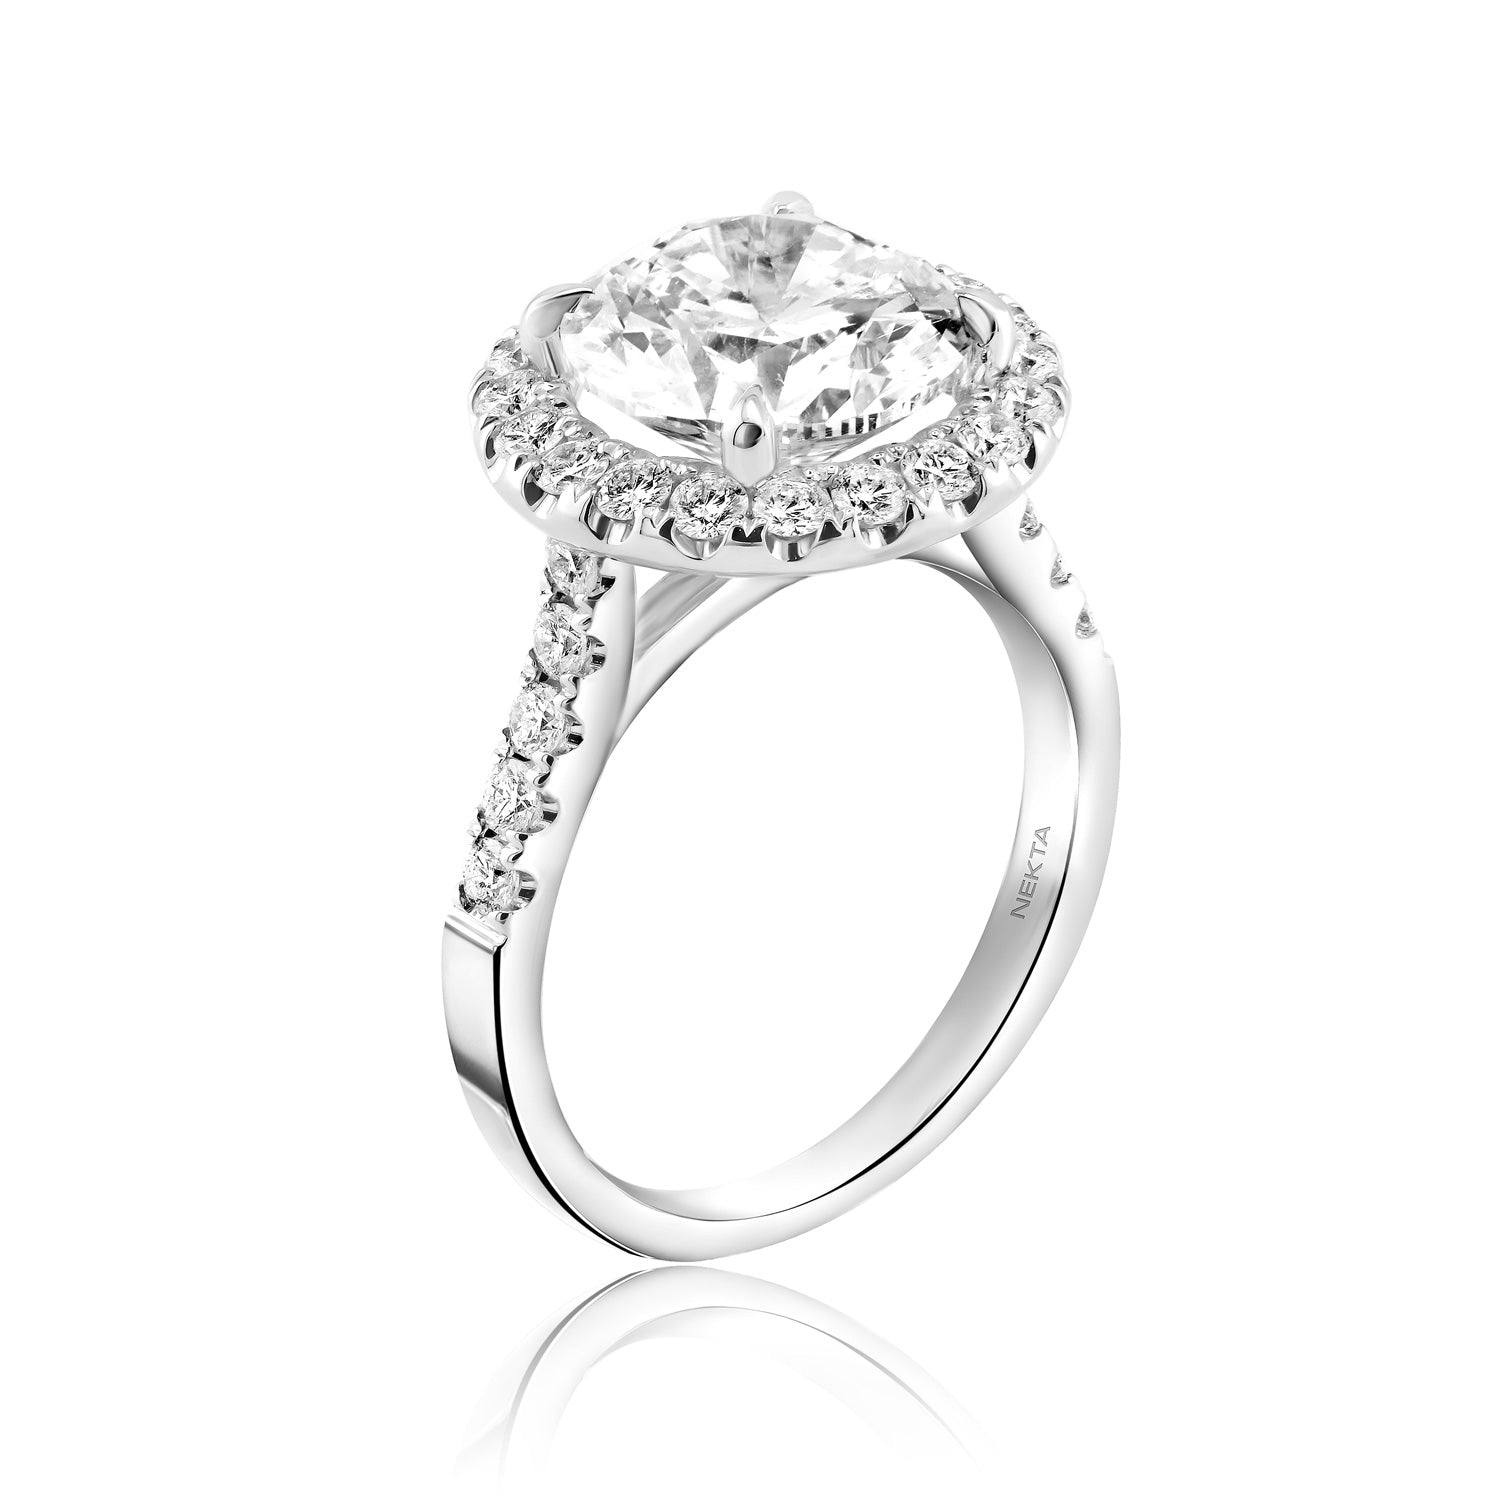 ROUND CUT E COLOR VS2 CLARITY HALO DIAMOND ENGAGEMENT RING Side View